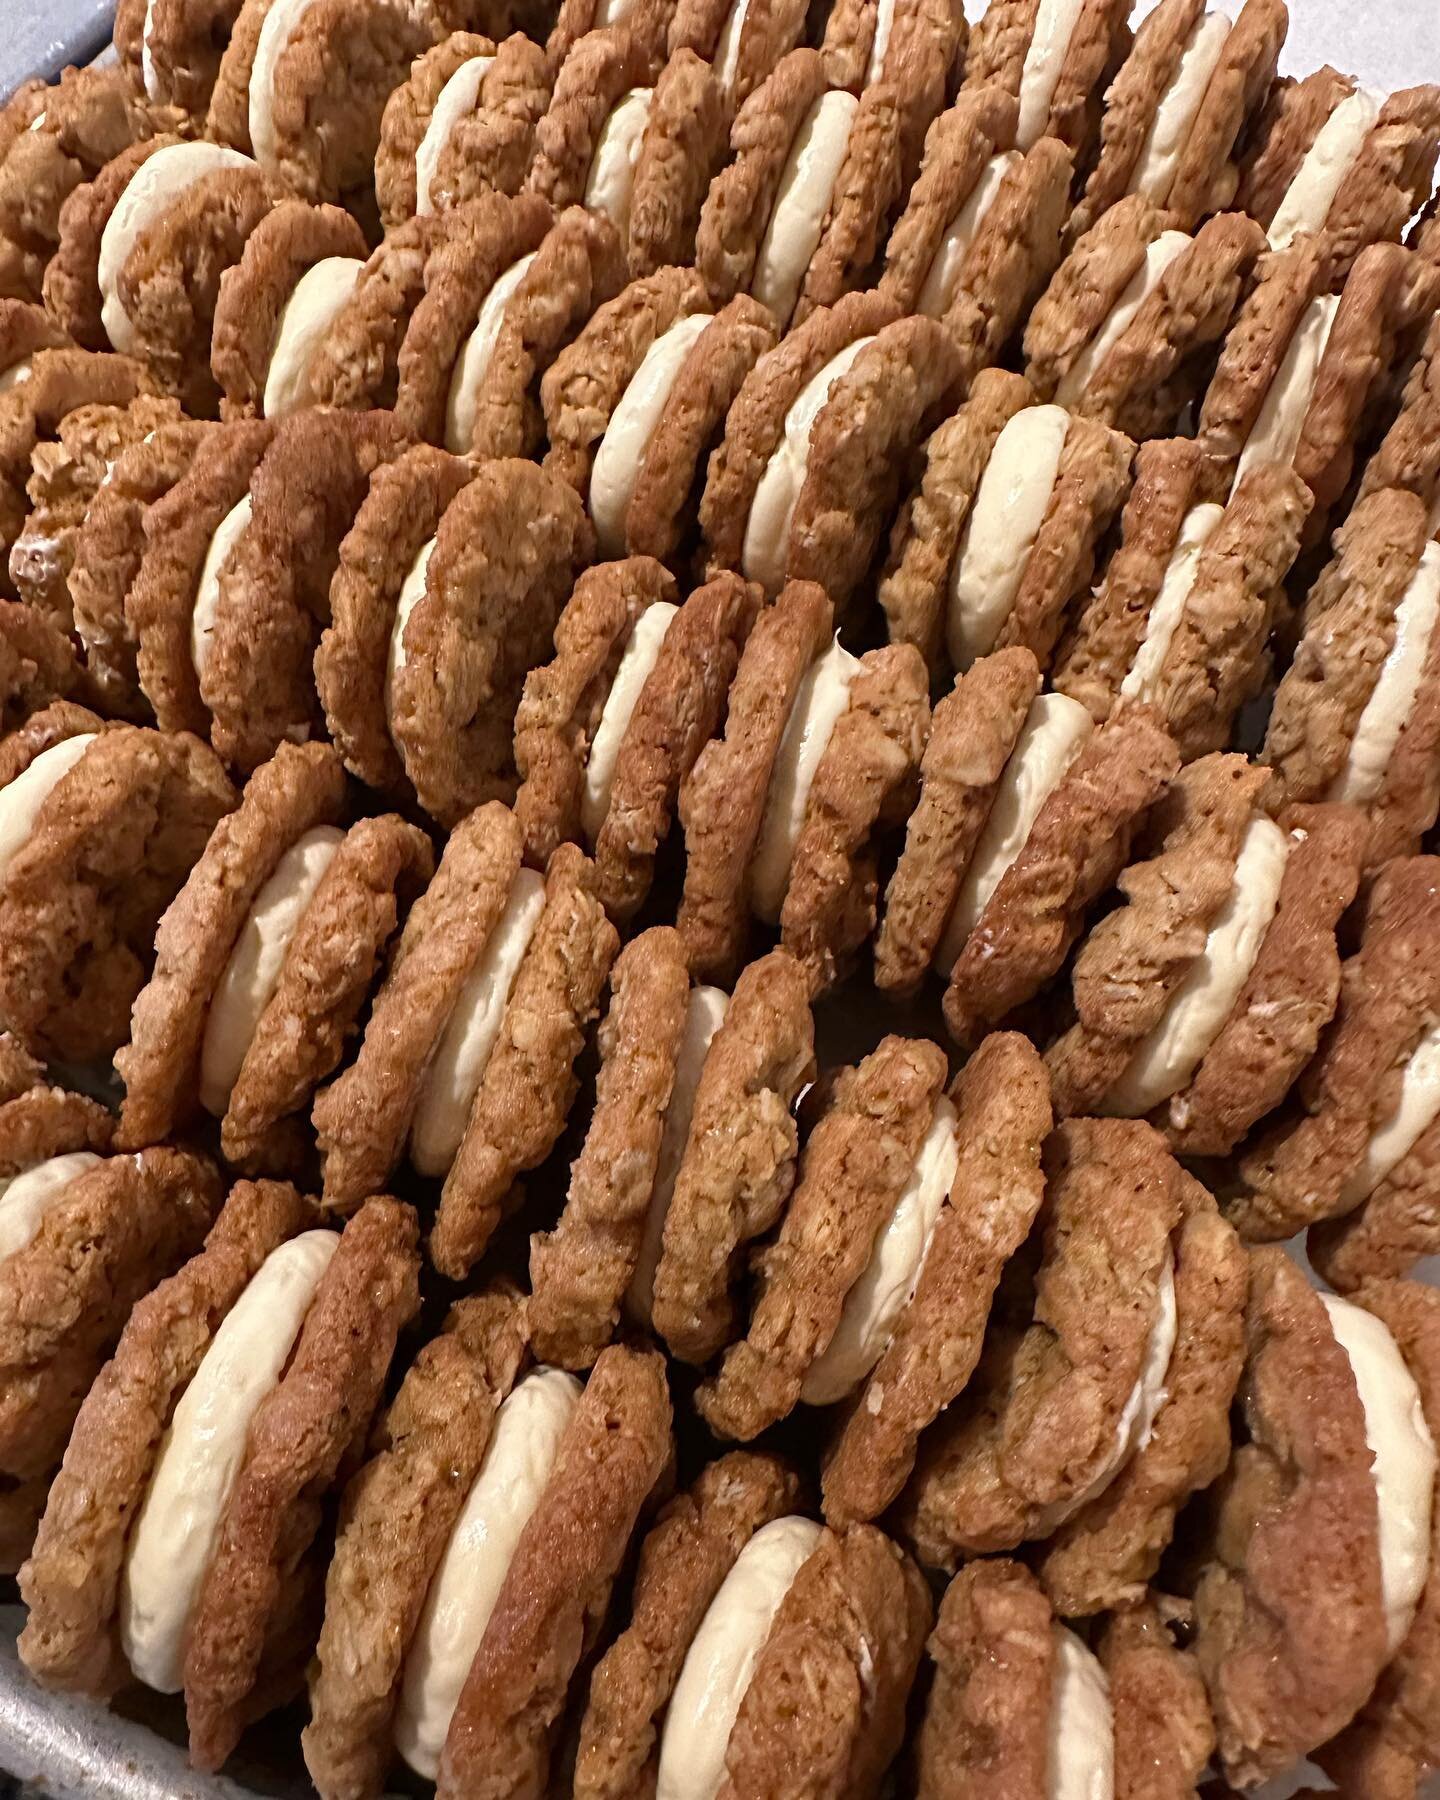 This weekend is the last chance to try our March Specials! Our oatmeal sandwich cookie is deliciously chewy, lightly spiced with coriander and filled with a rich grapefruit pate bombe! Try it with our housemade Irish cream latte! Here until sold out 